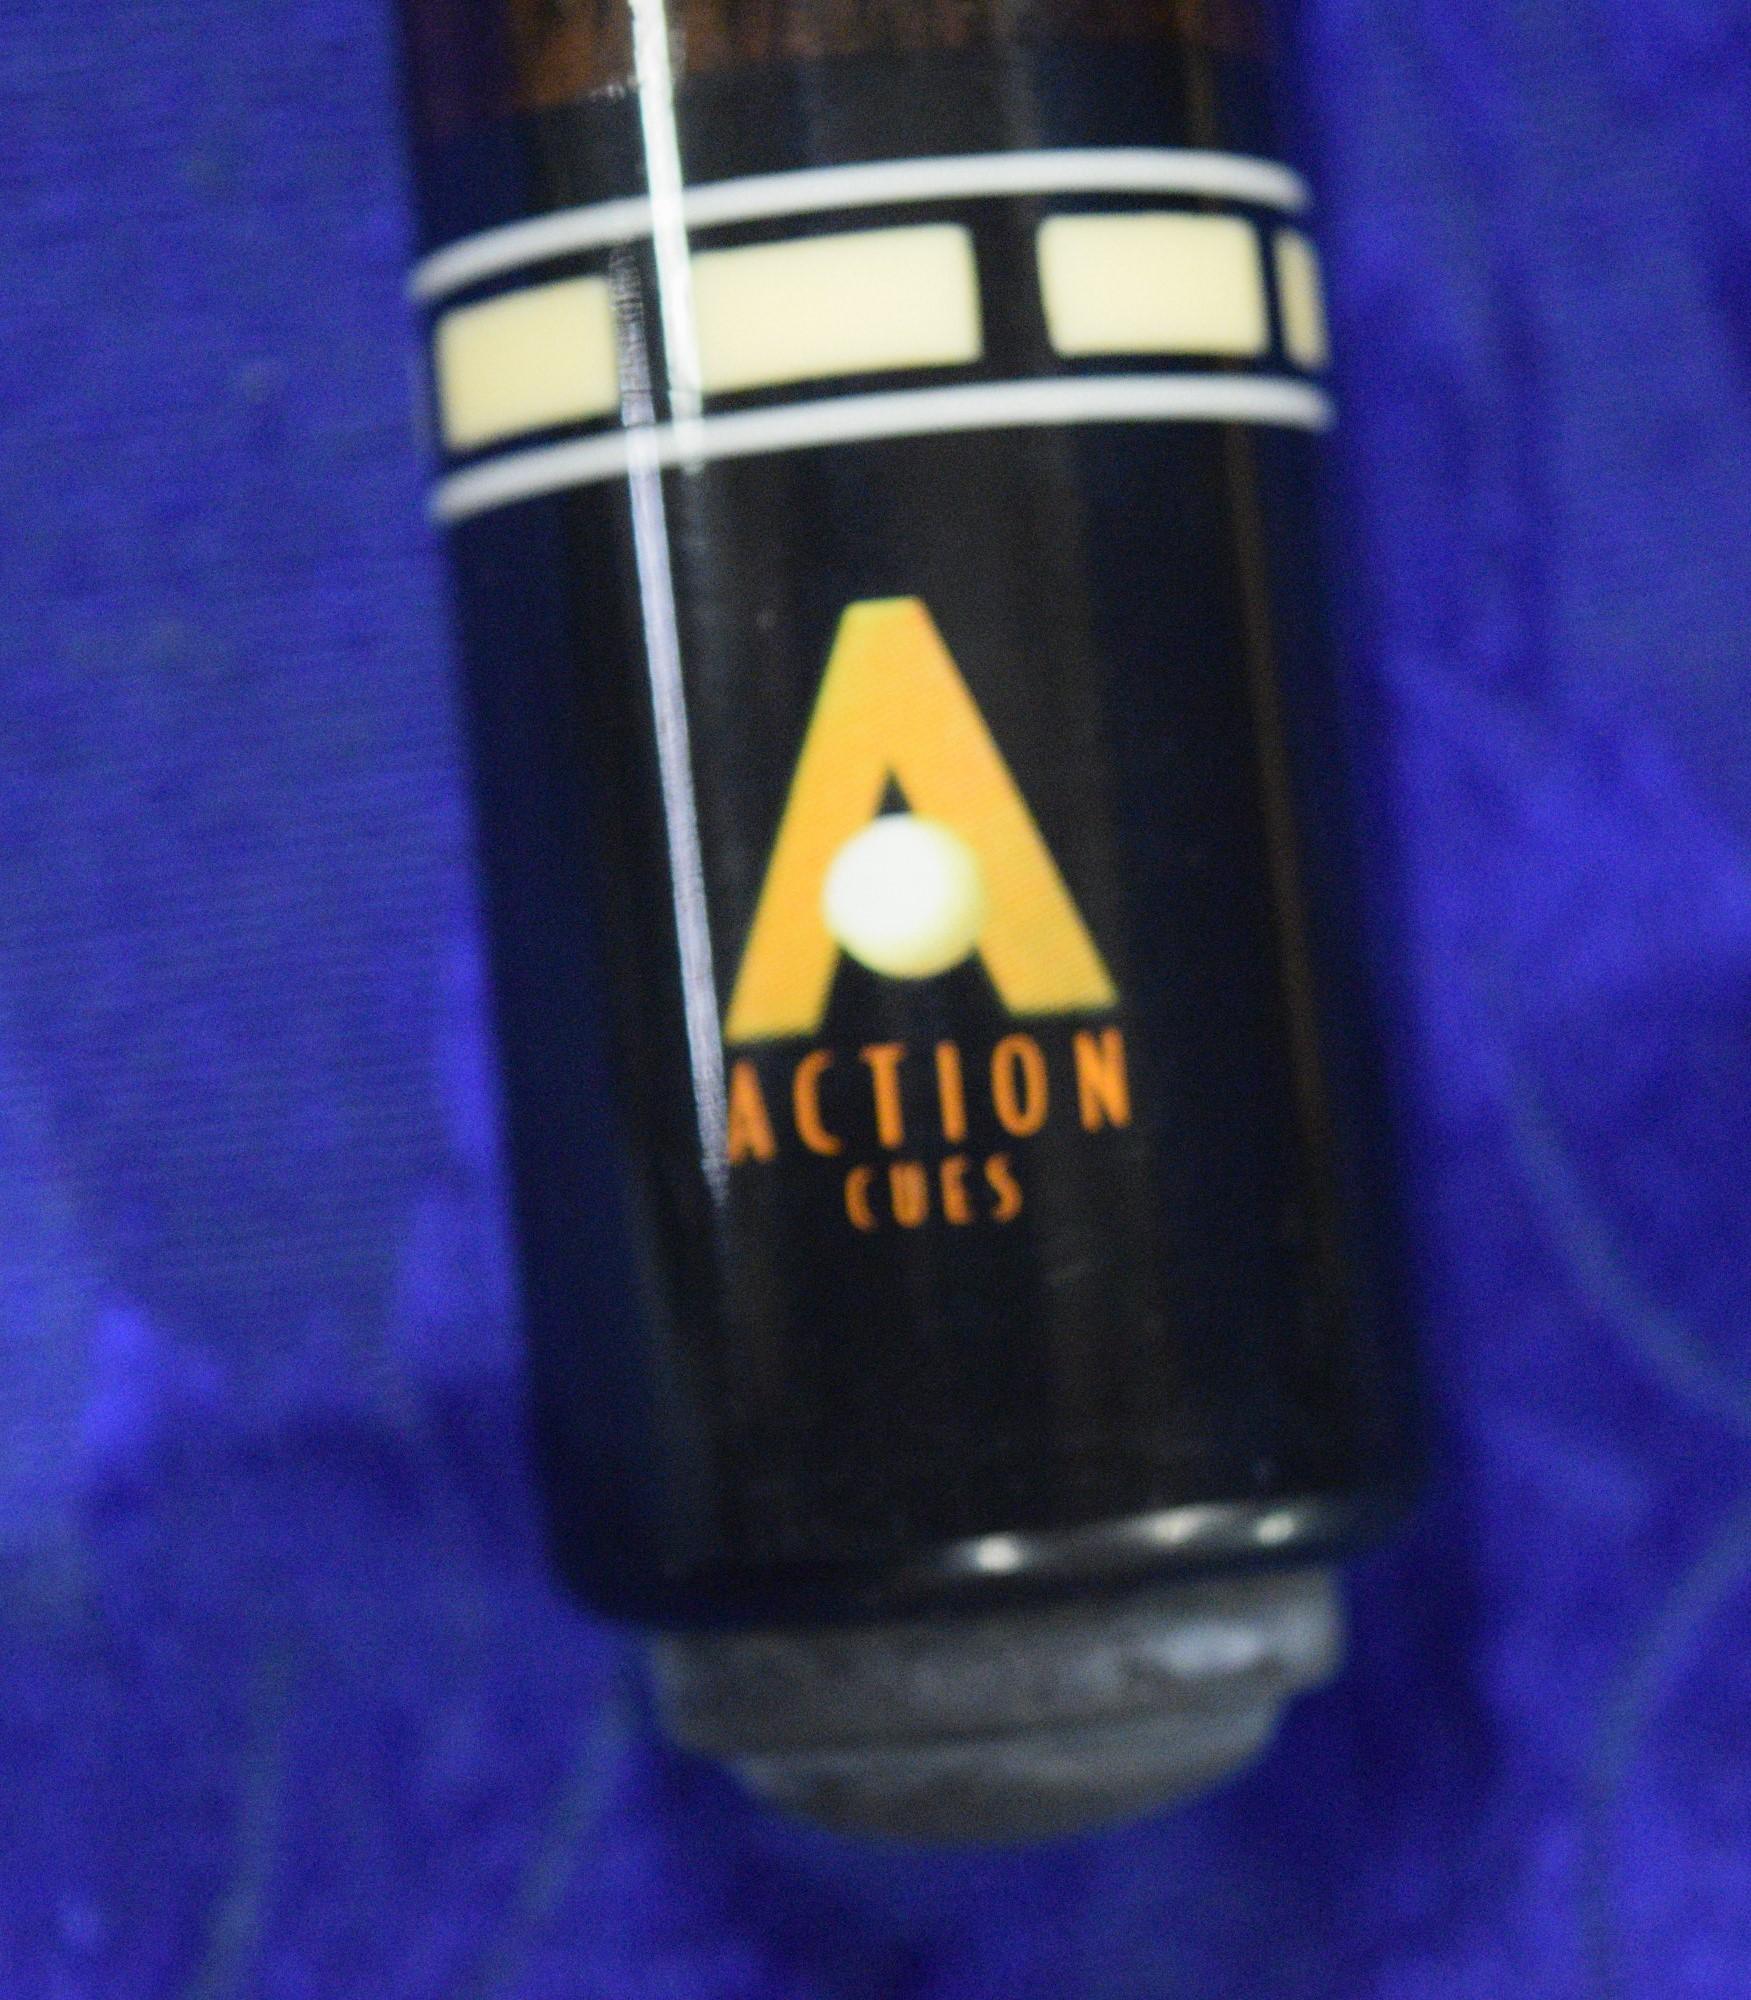 ACTION POOL CUE!